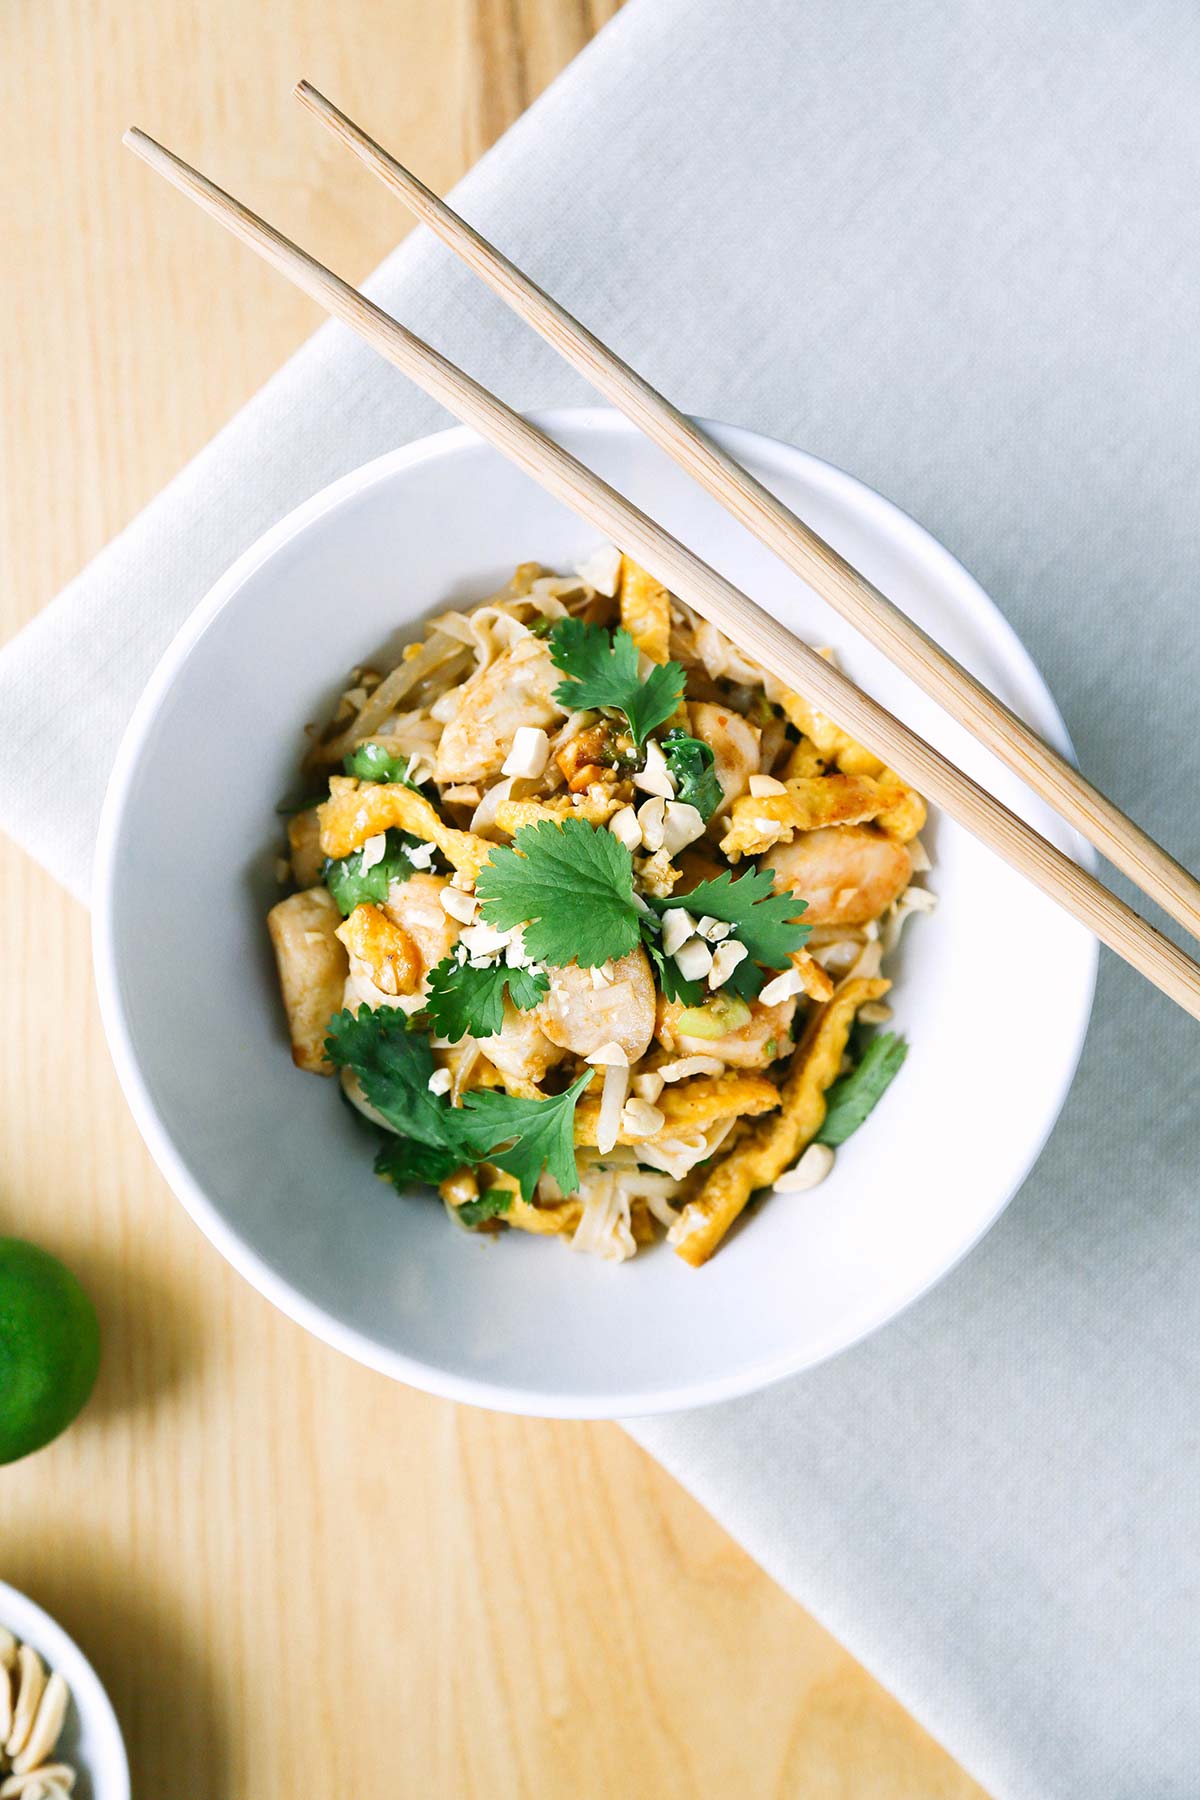 Pad thai recipe for keto and low carb. Uses shirataki noodles with chicken.